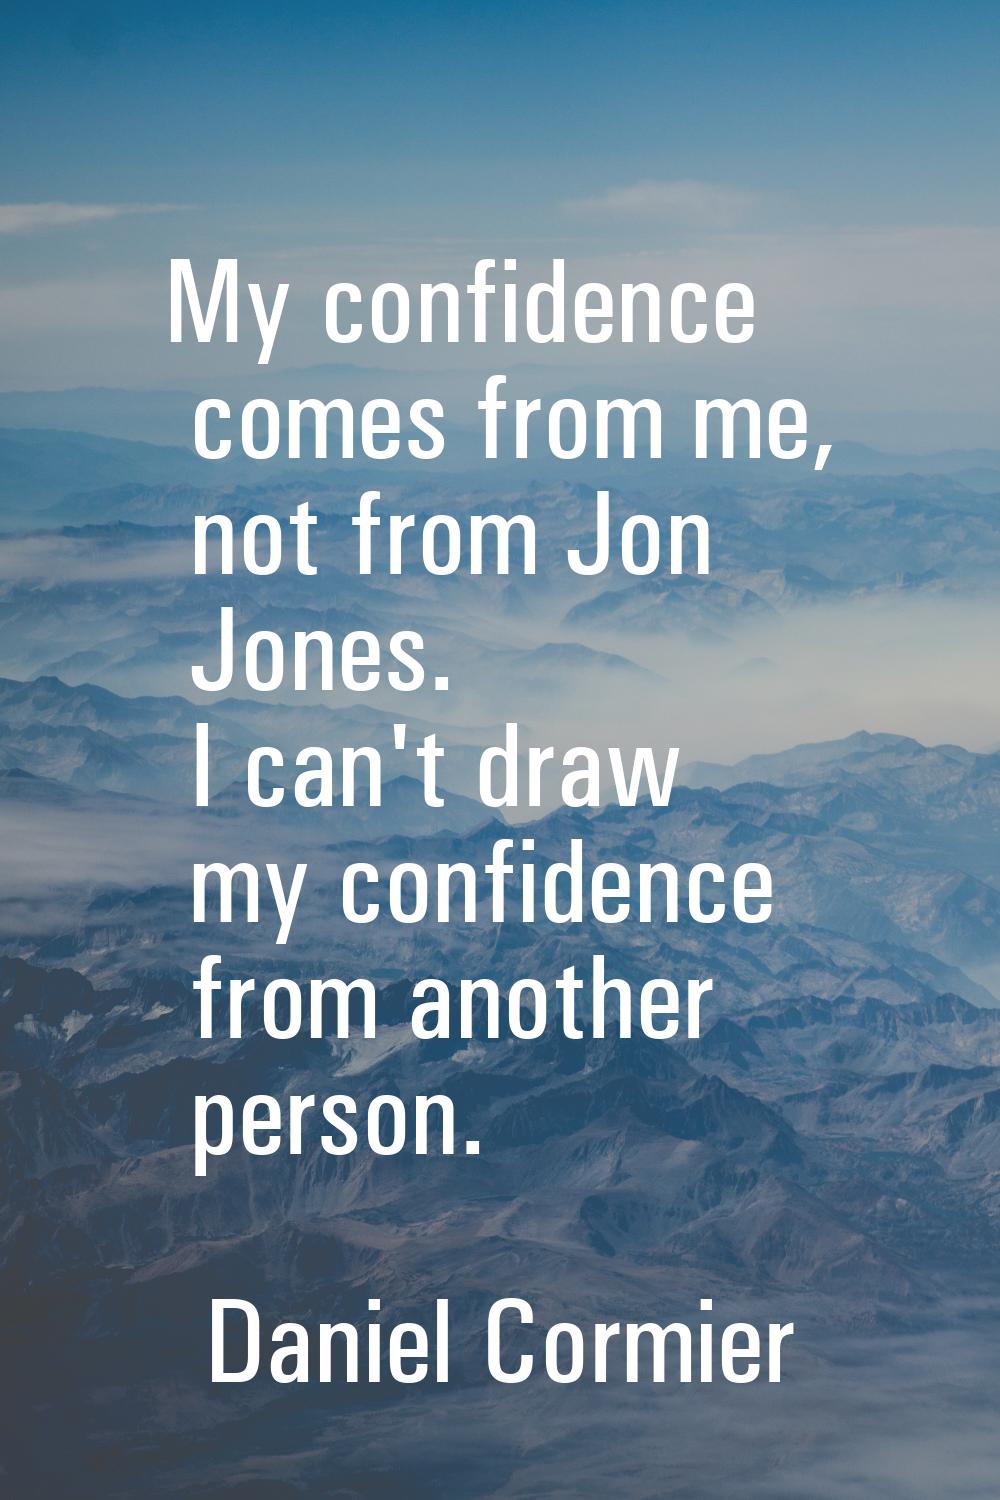 My confidence comes from me, not from Jon Jones. I can't draw my confidence from another person.